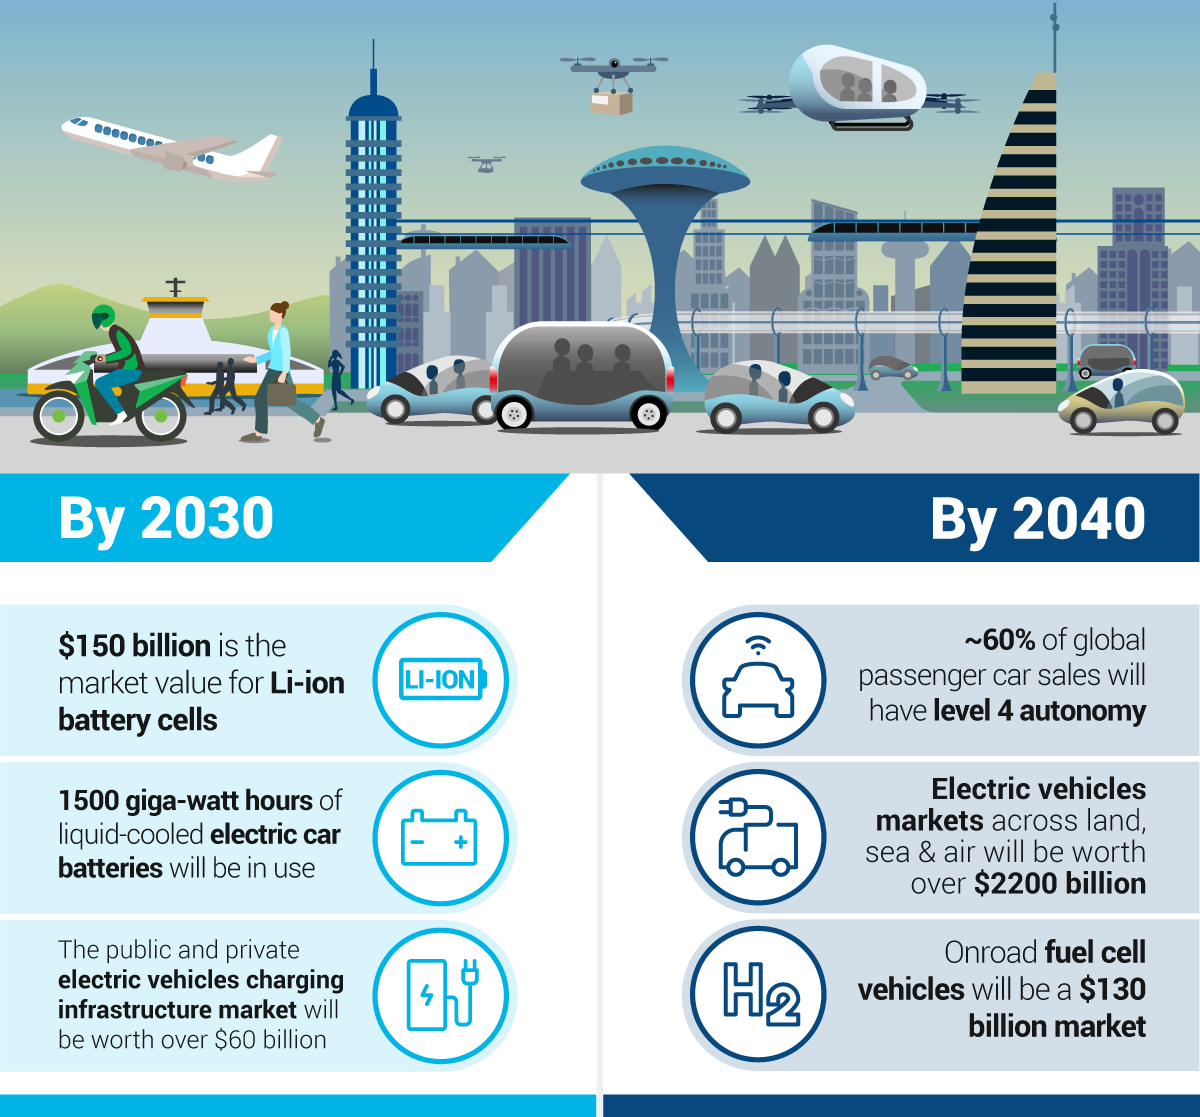 electric vehicles infographic showing forecasts by 2030 and 2040